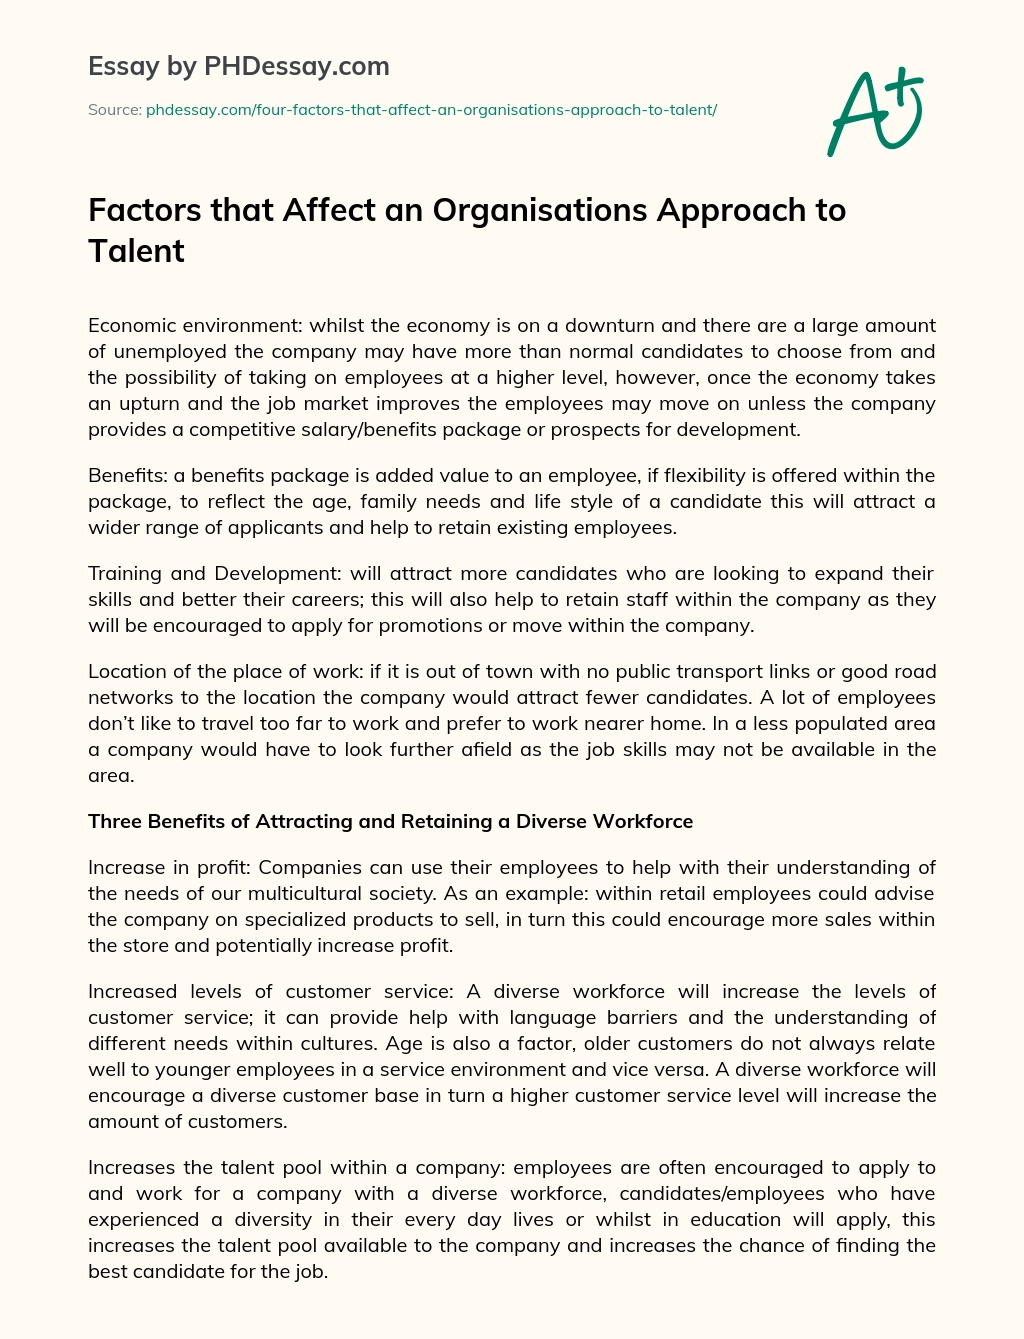 Factors that Affect an Organisations Approach to Talent essay